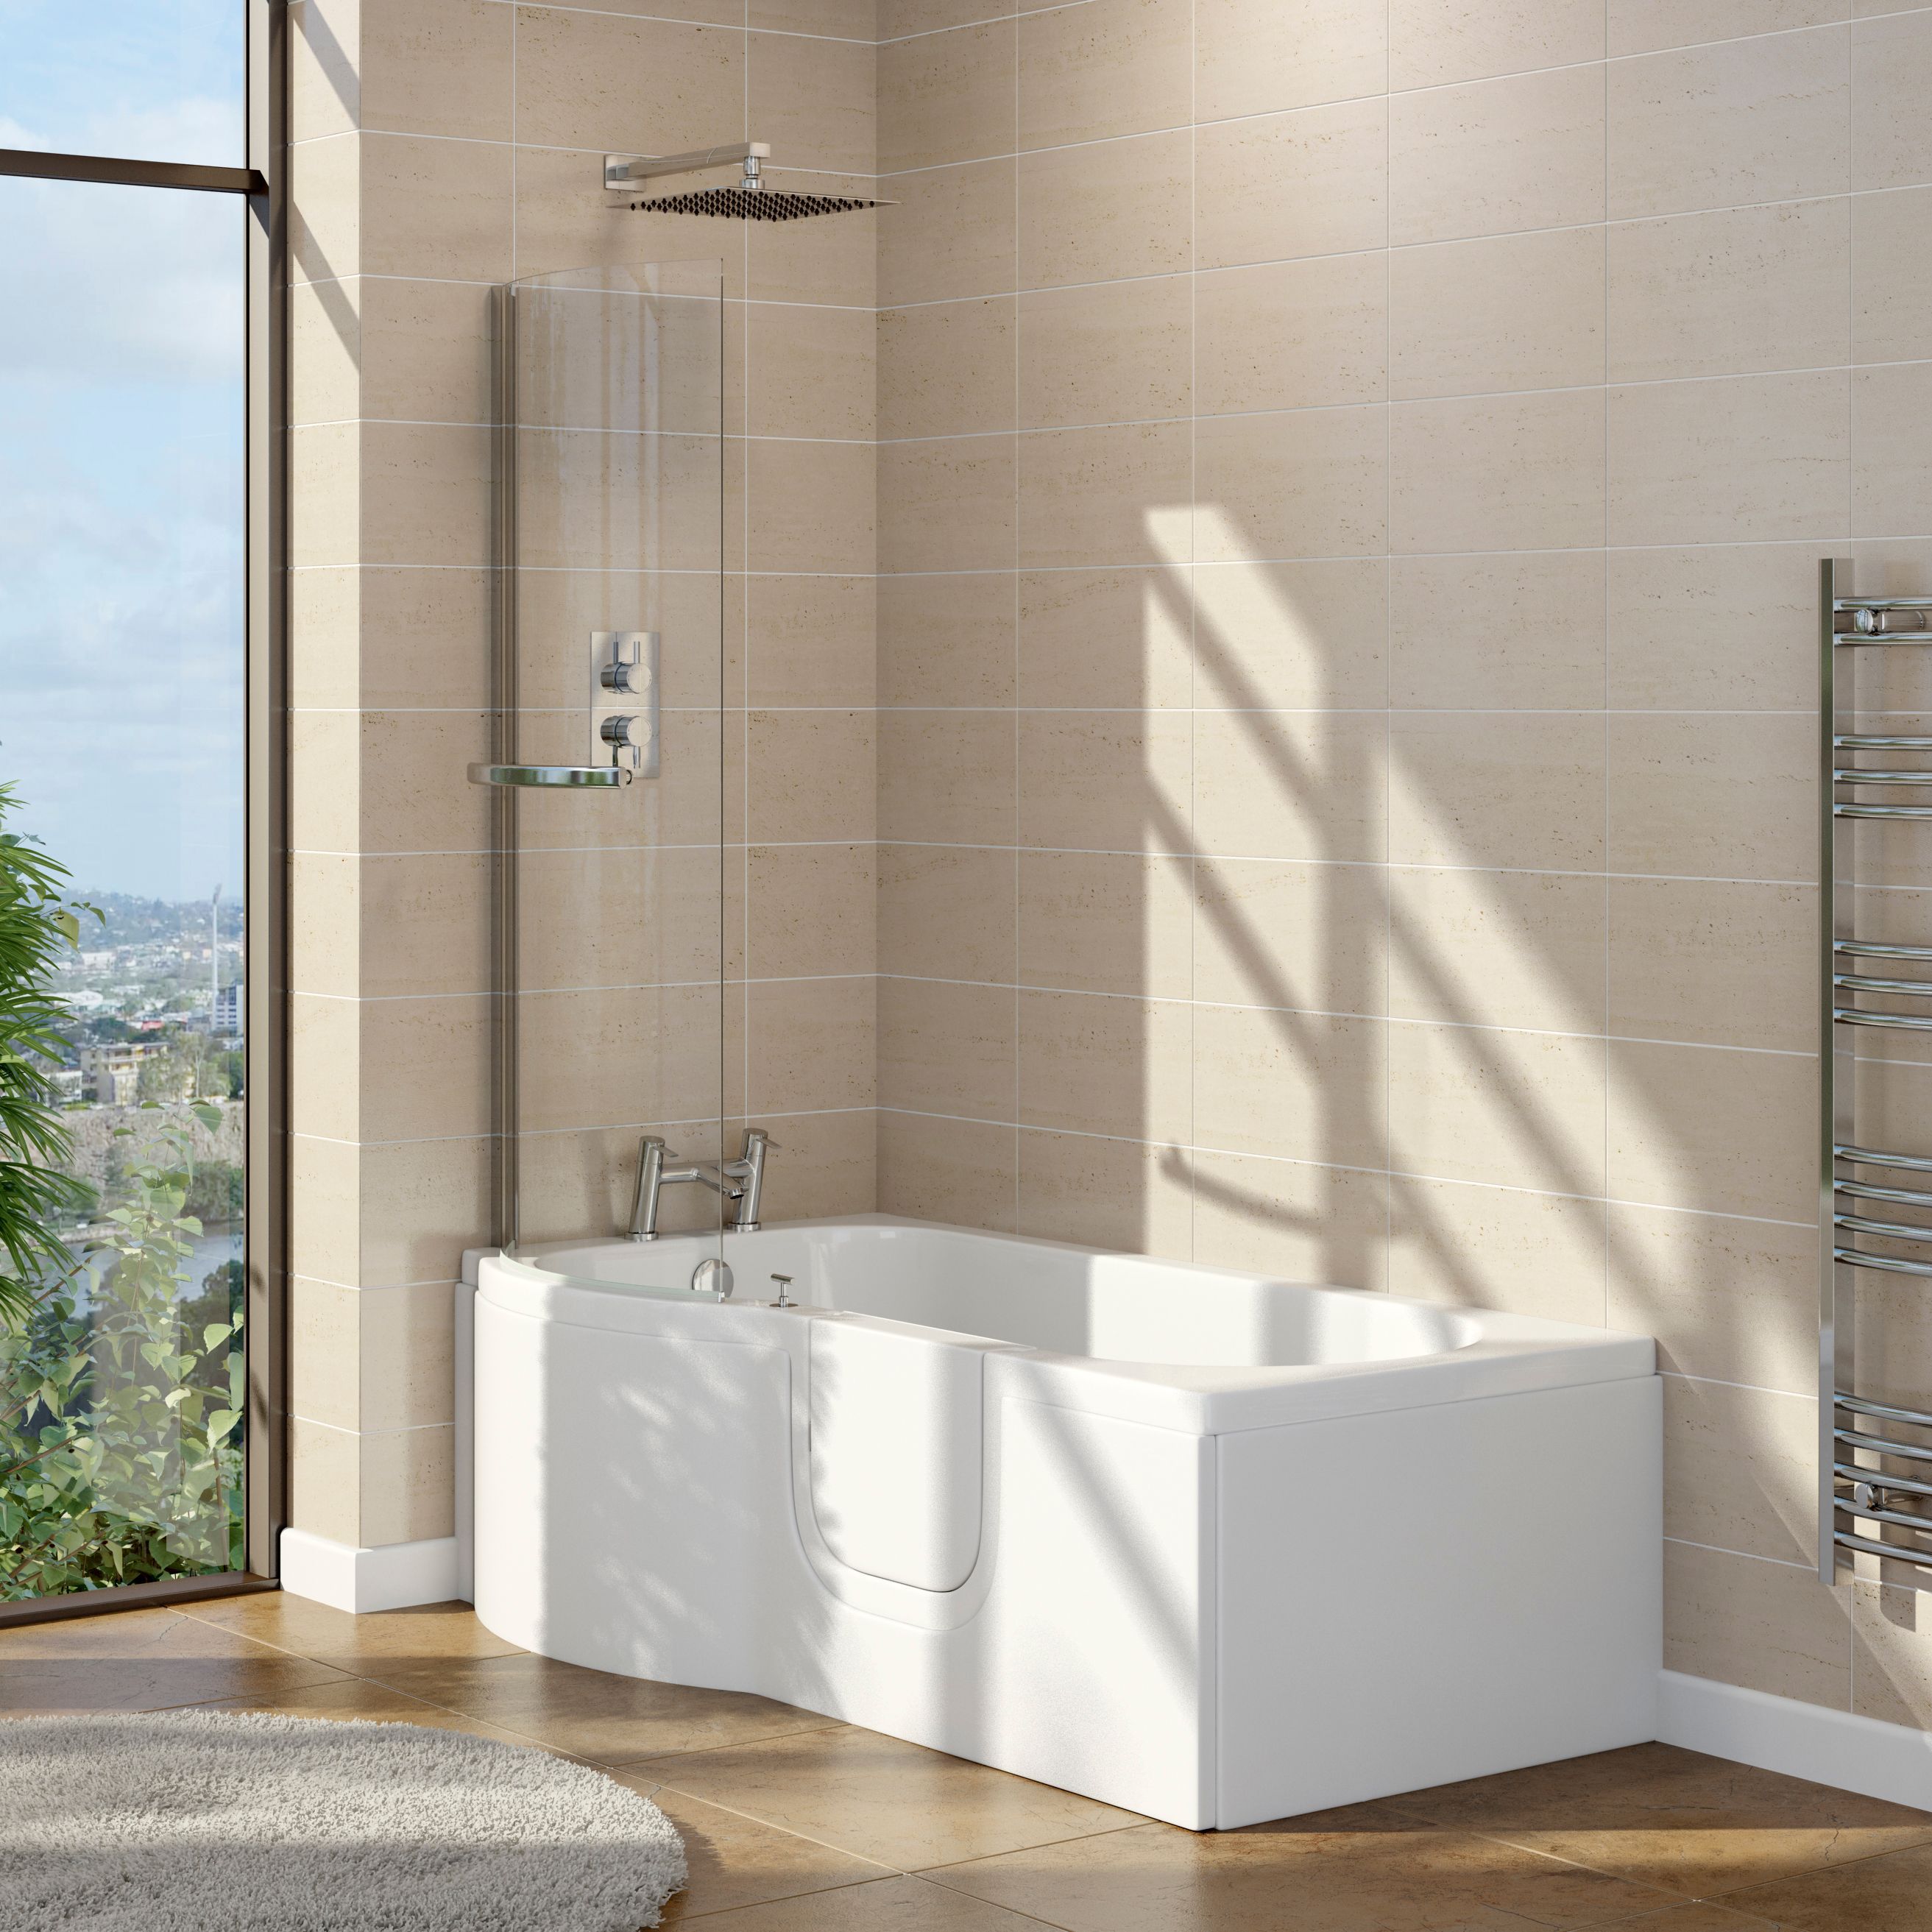 Cooke & Lewis White Easy-access Acrylic P-shaped Right-handed Shower Bath (L)1675mm (W)850mm